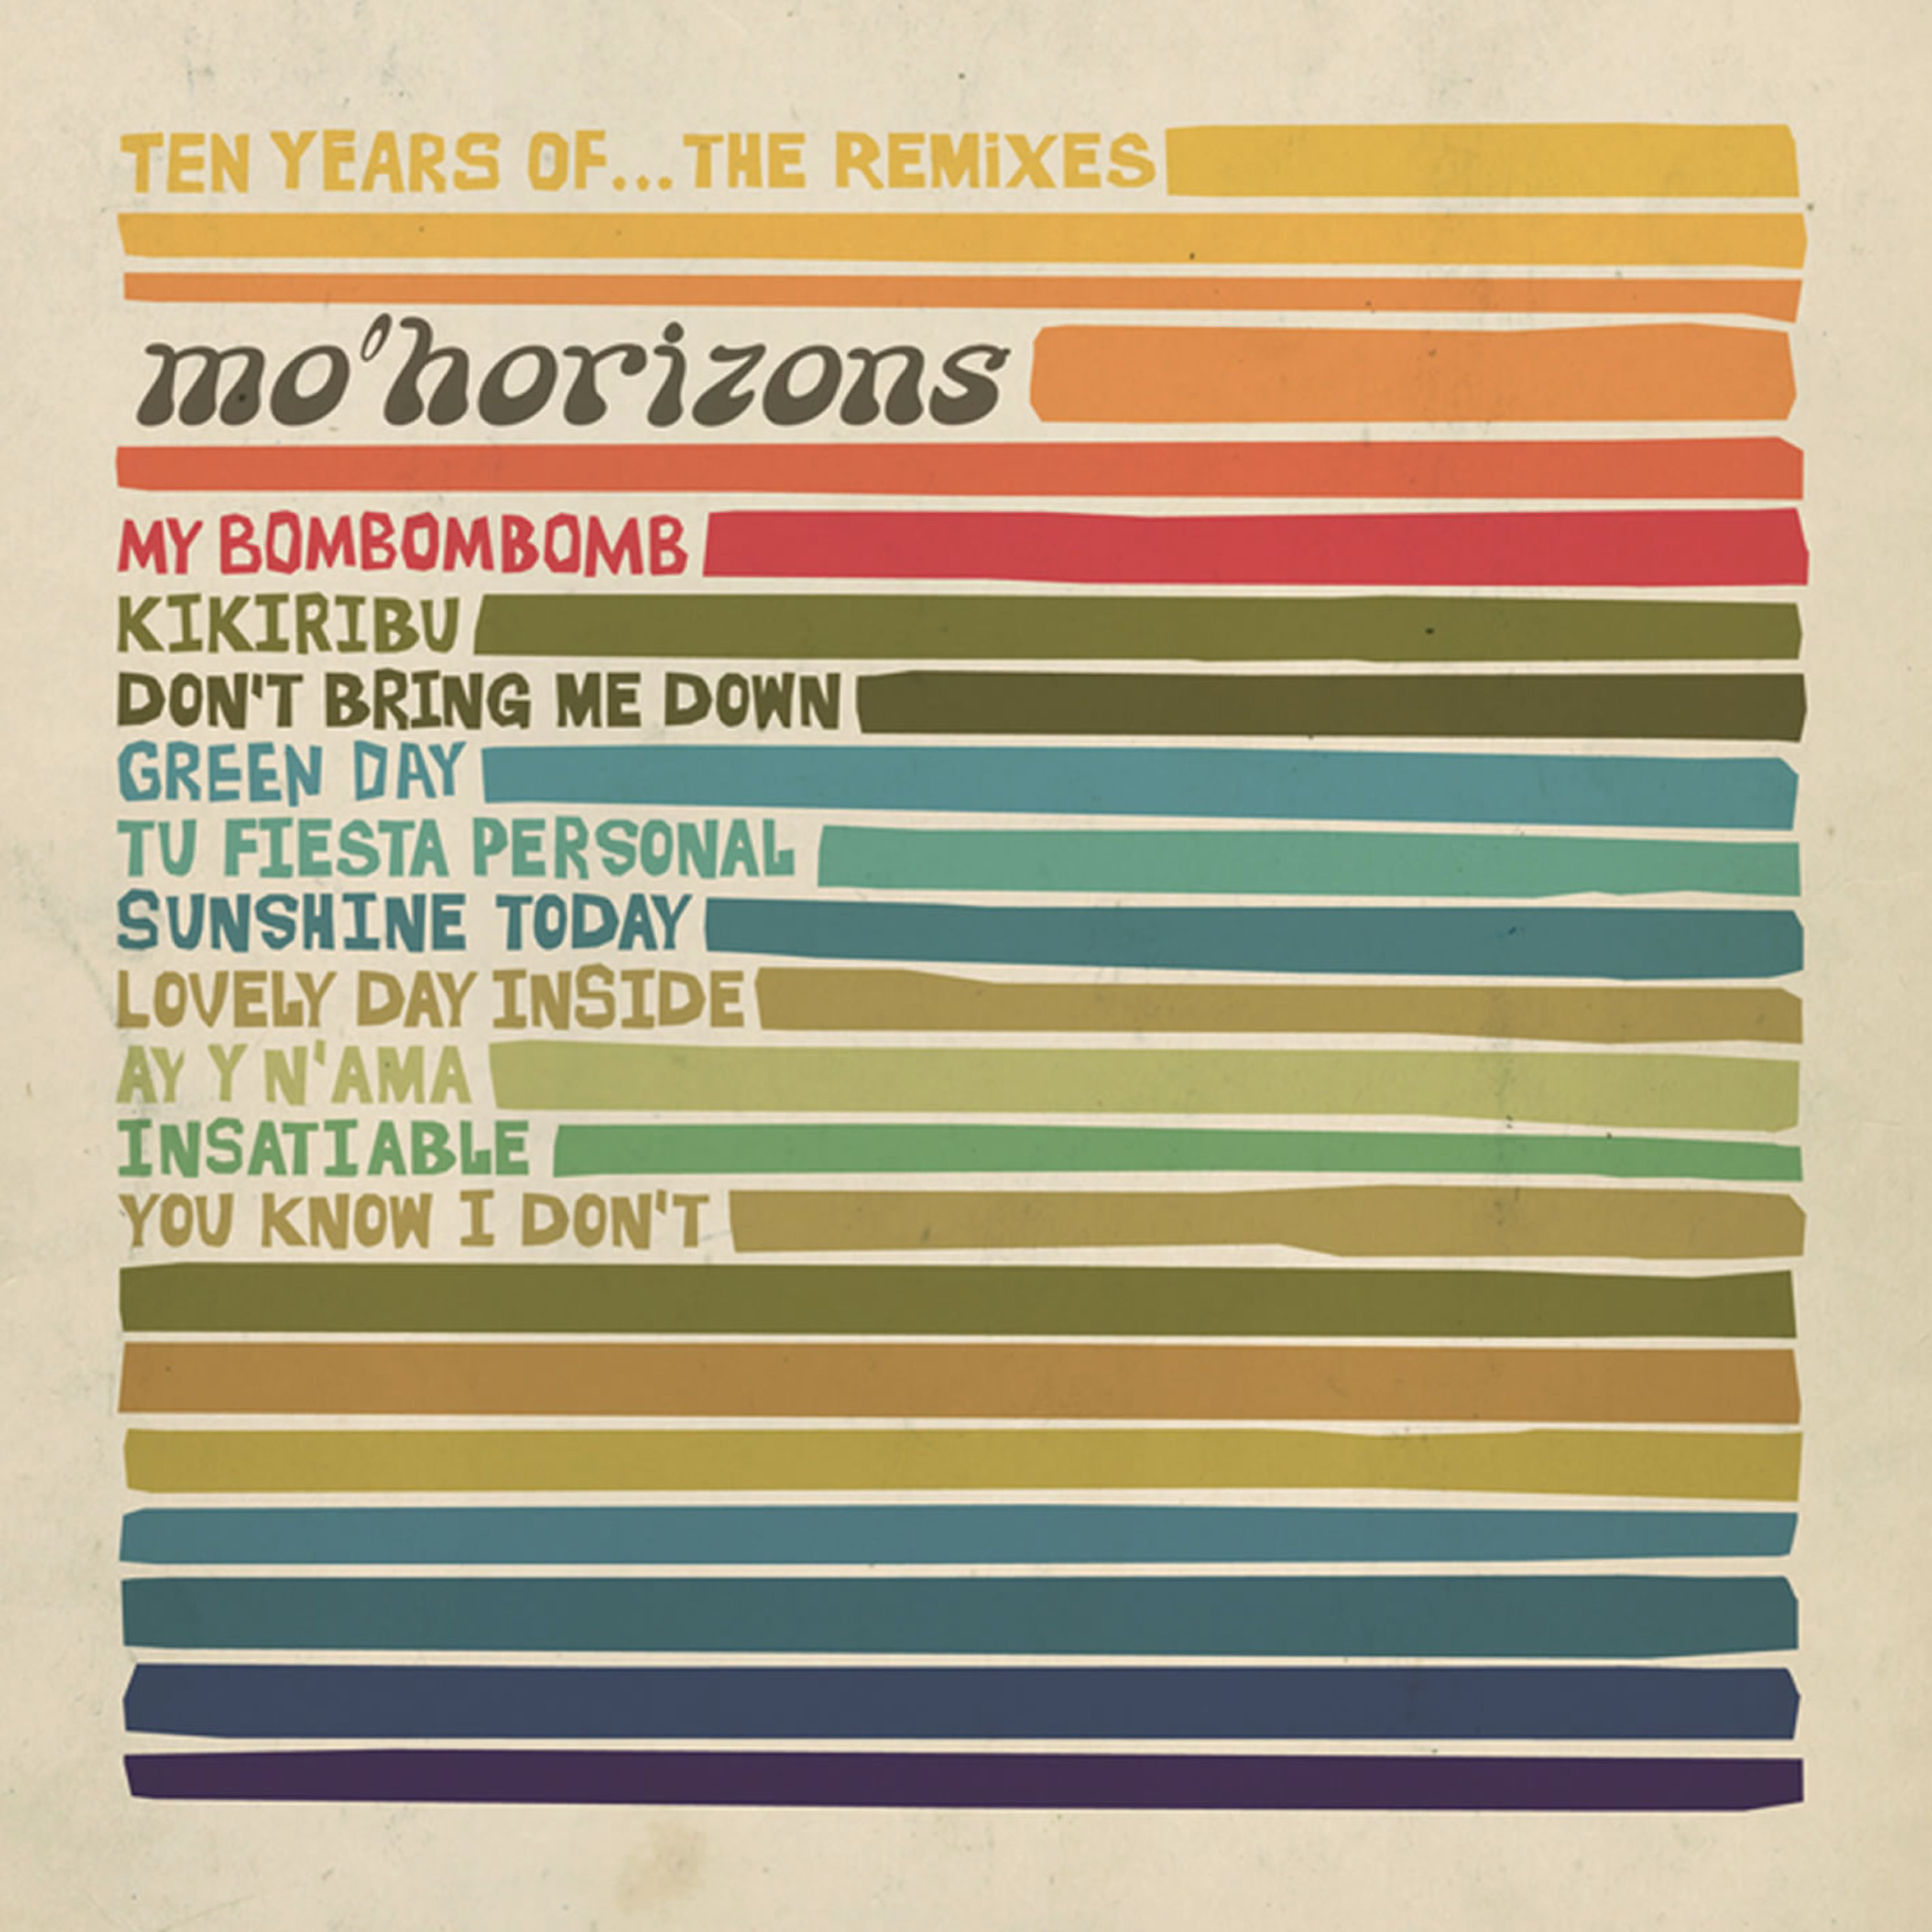 10 years of... The Remixes